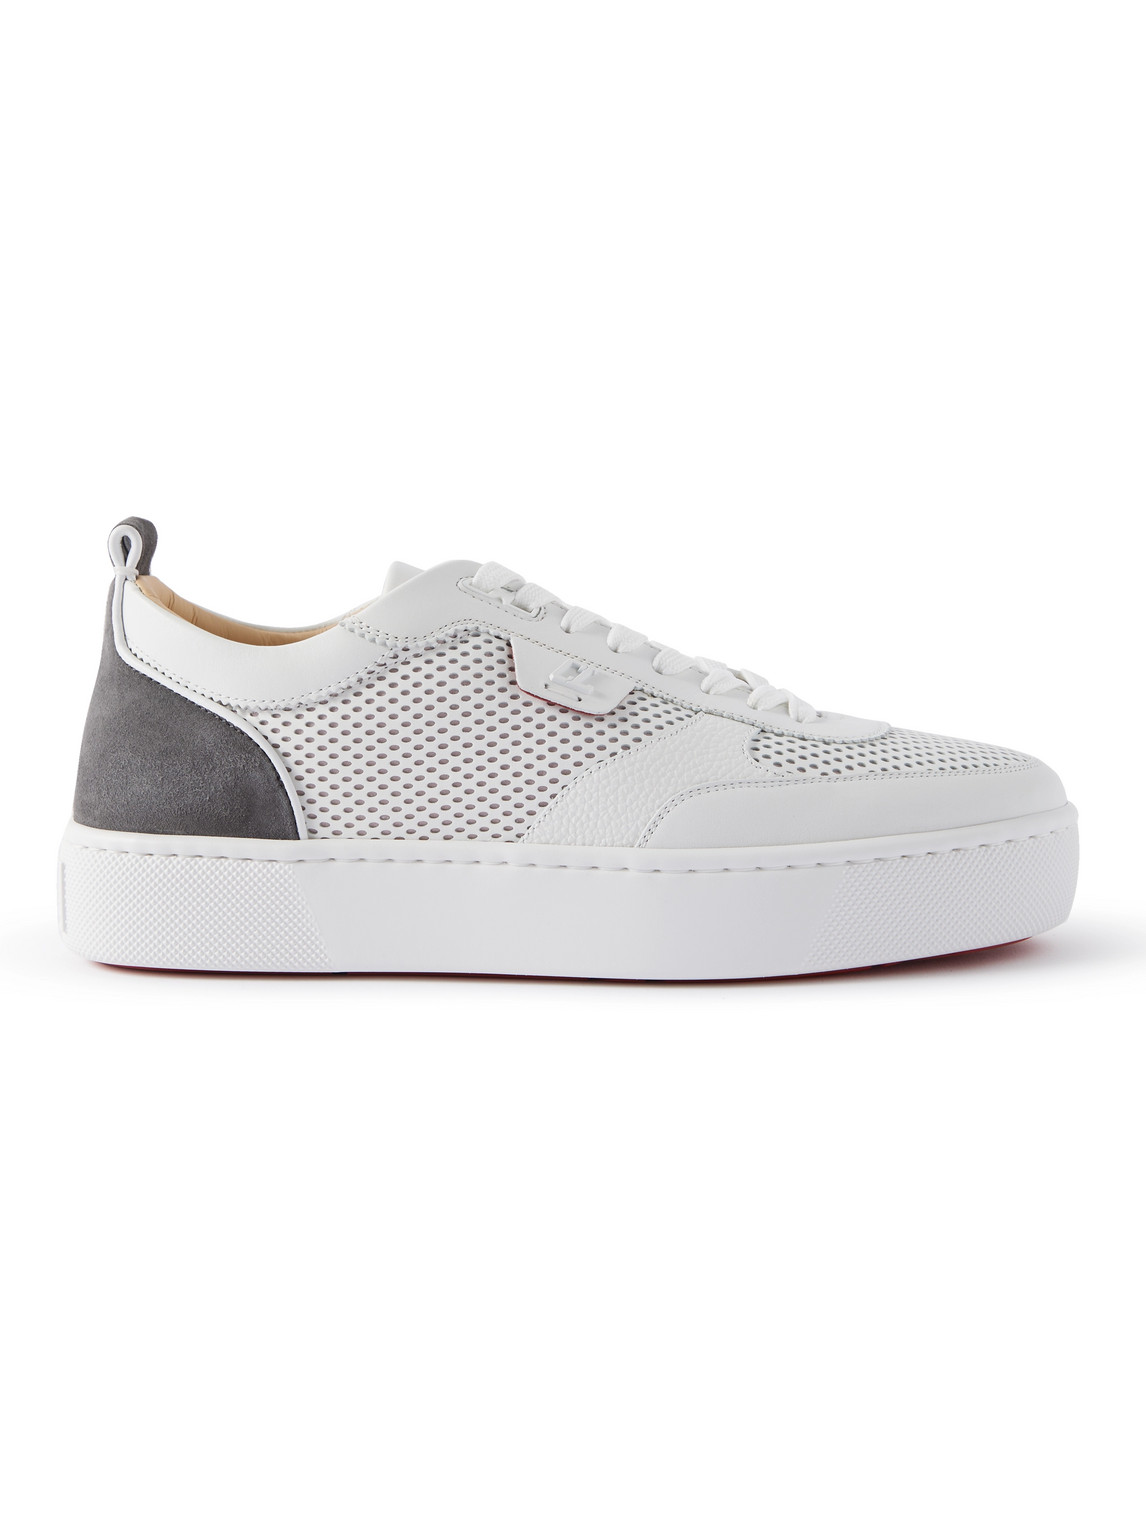 Christian Louboutin Happyrui Suede-trimmed Perforated Leather Sneakers In White